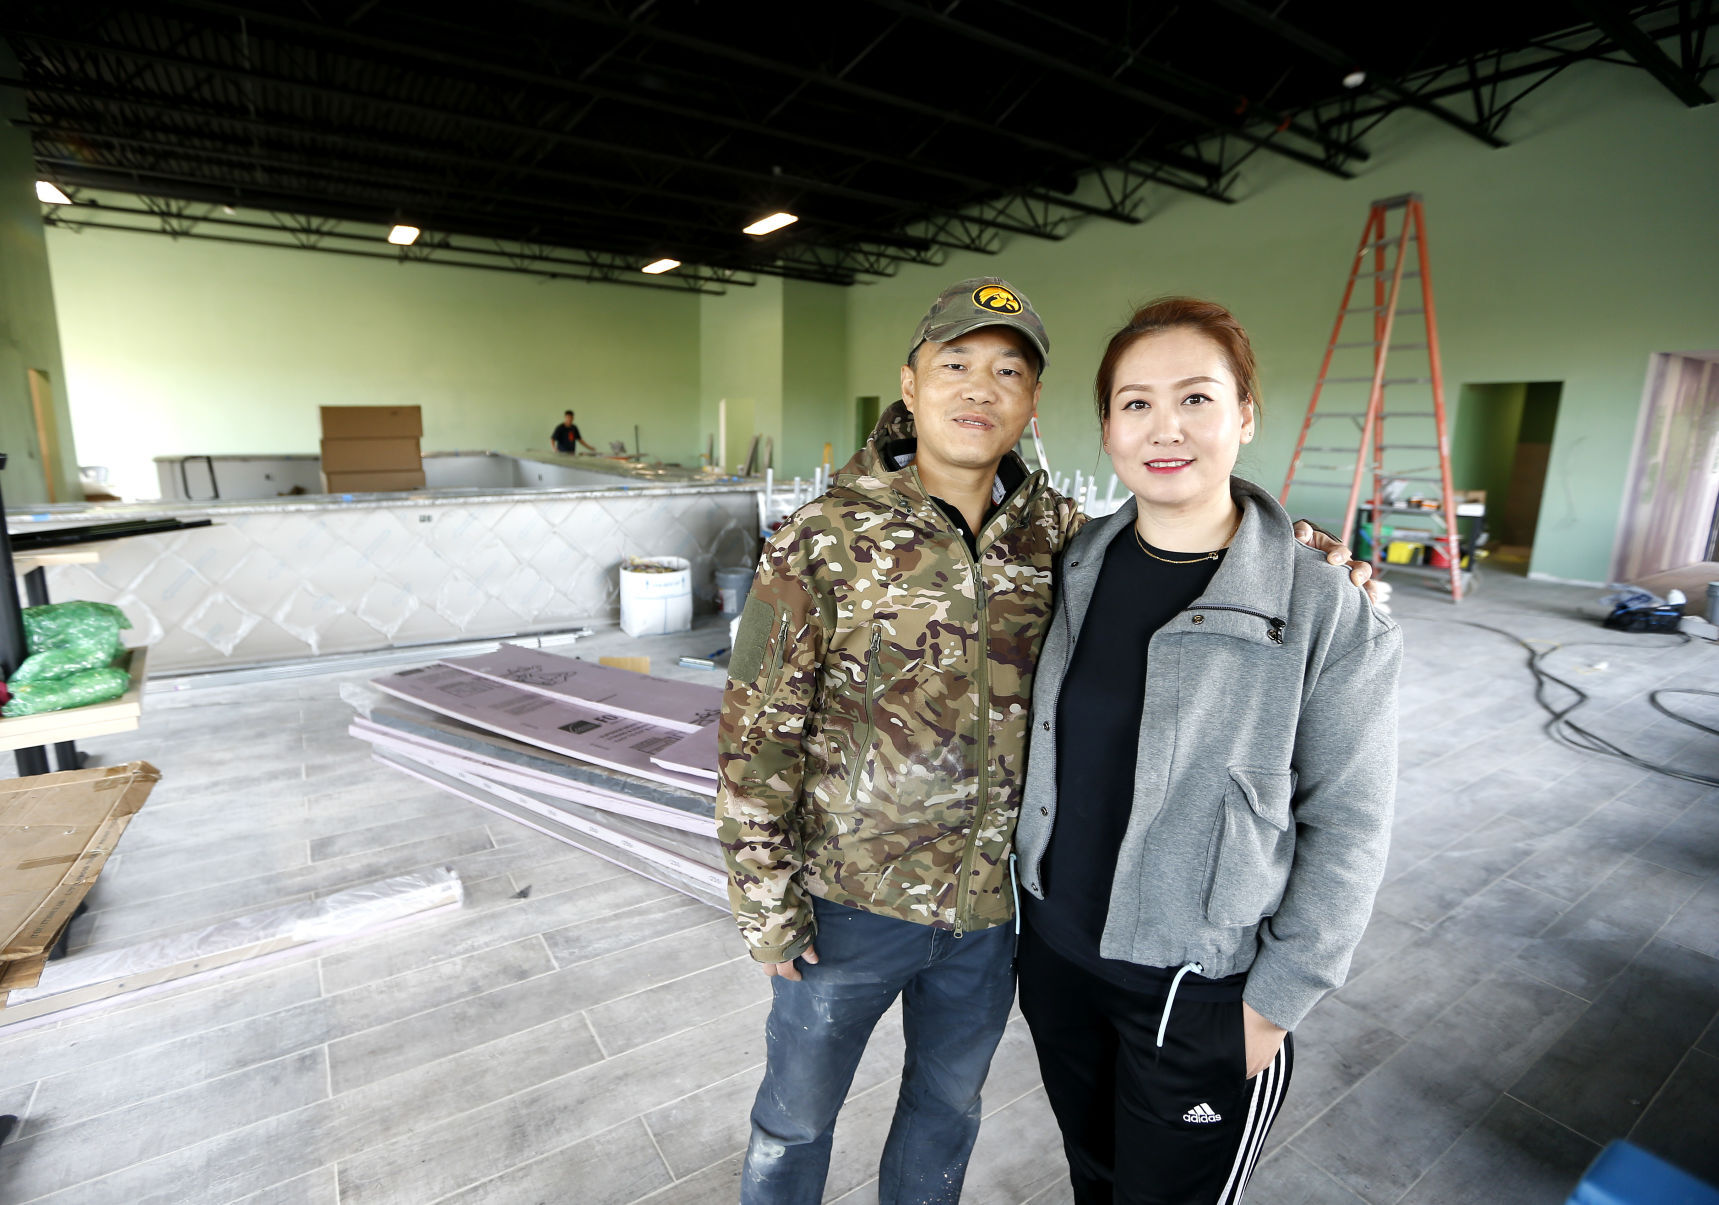 Gordon Gao and his wife, Lina Qiu, will open Lina’s Lounge on Holliday Drive in Dubuque.    PHOTO CREDIT: Dave Kettering